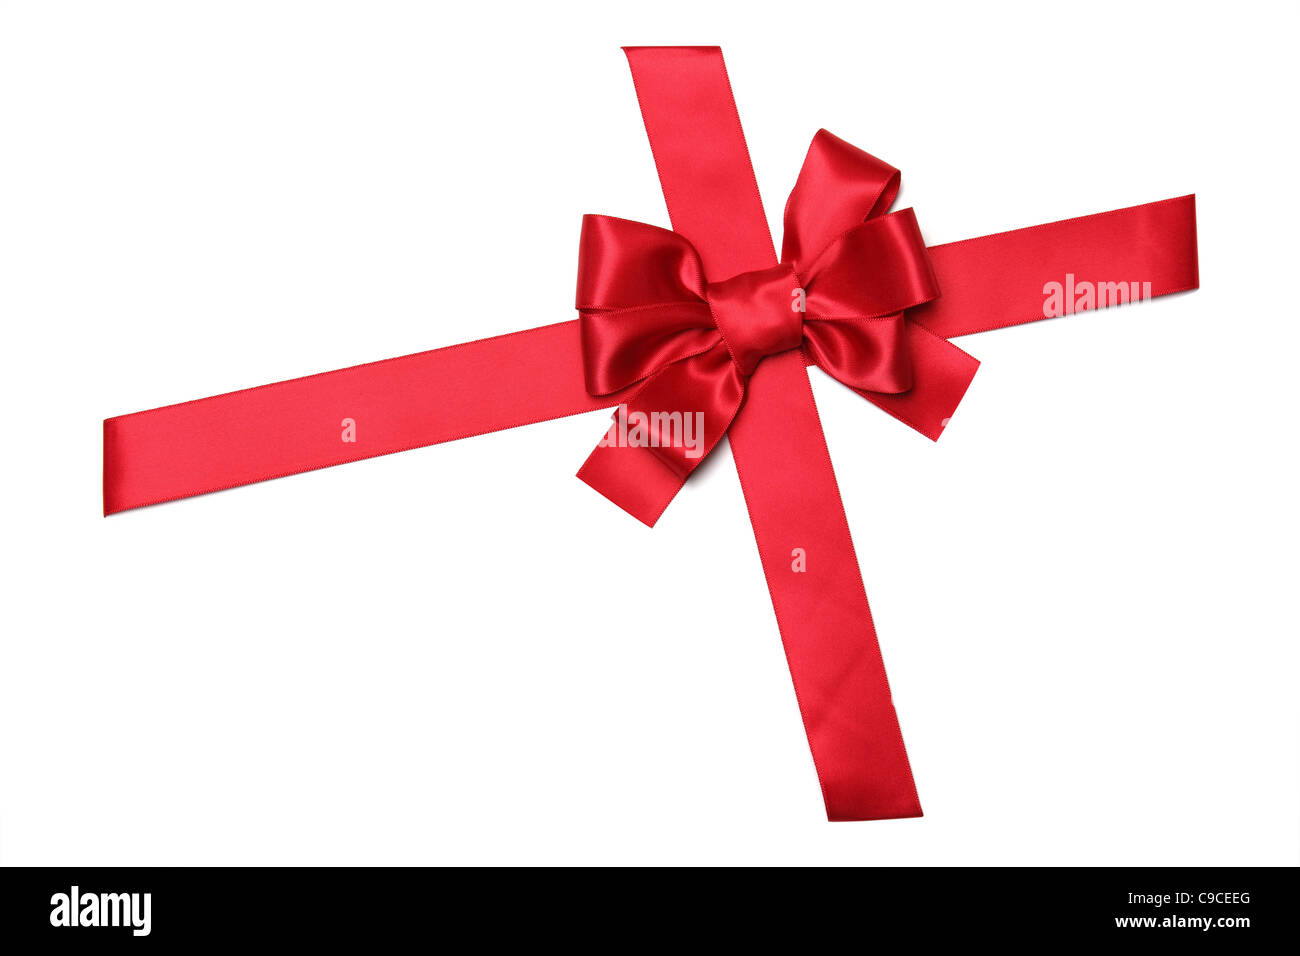 6,818,667 Red Ribbon Images, Stock Photos, 3D objects, & Vectors